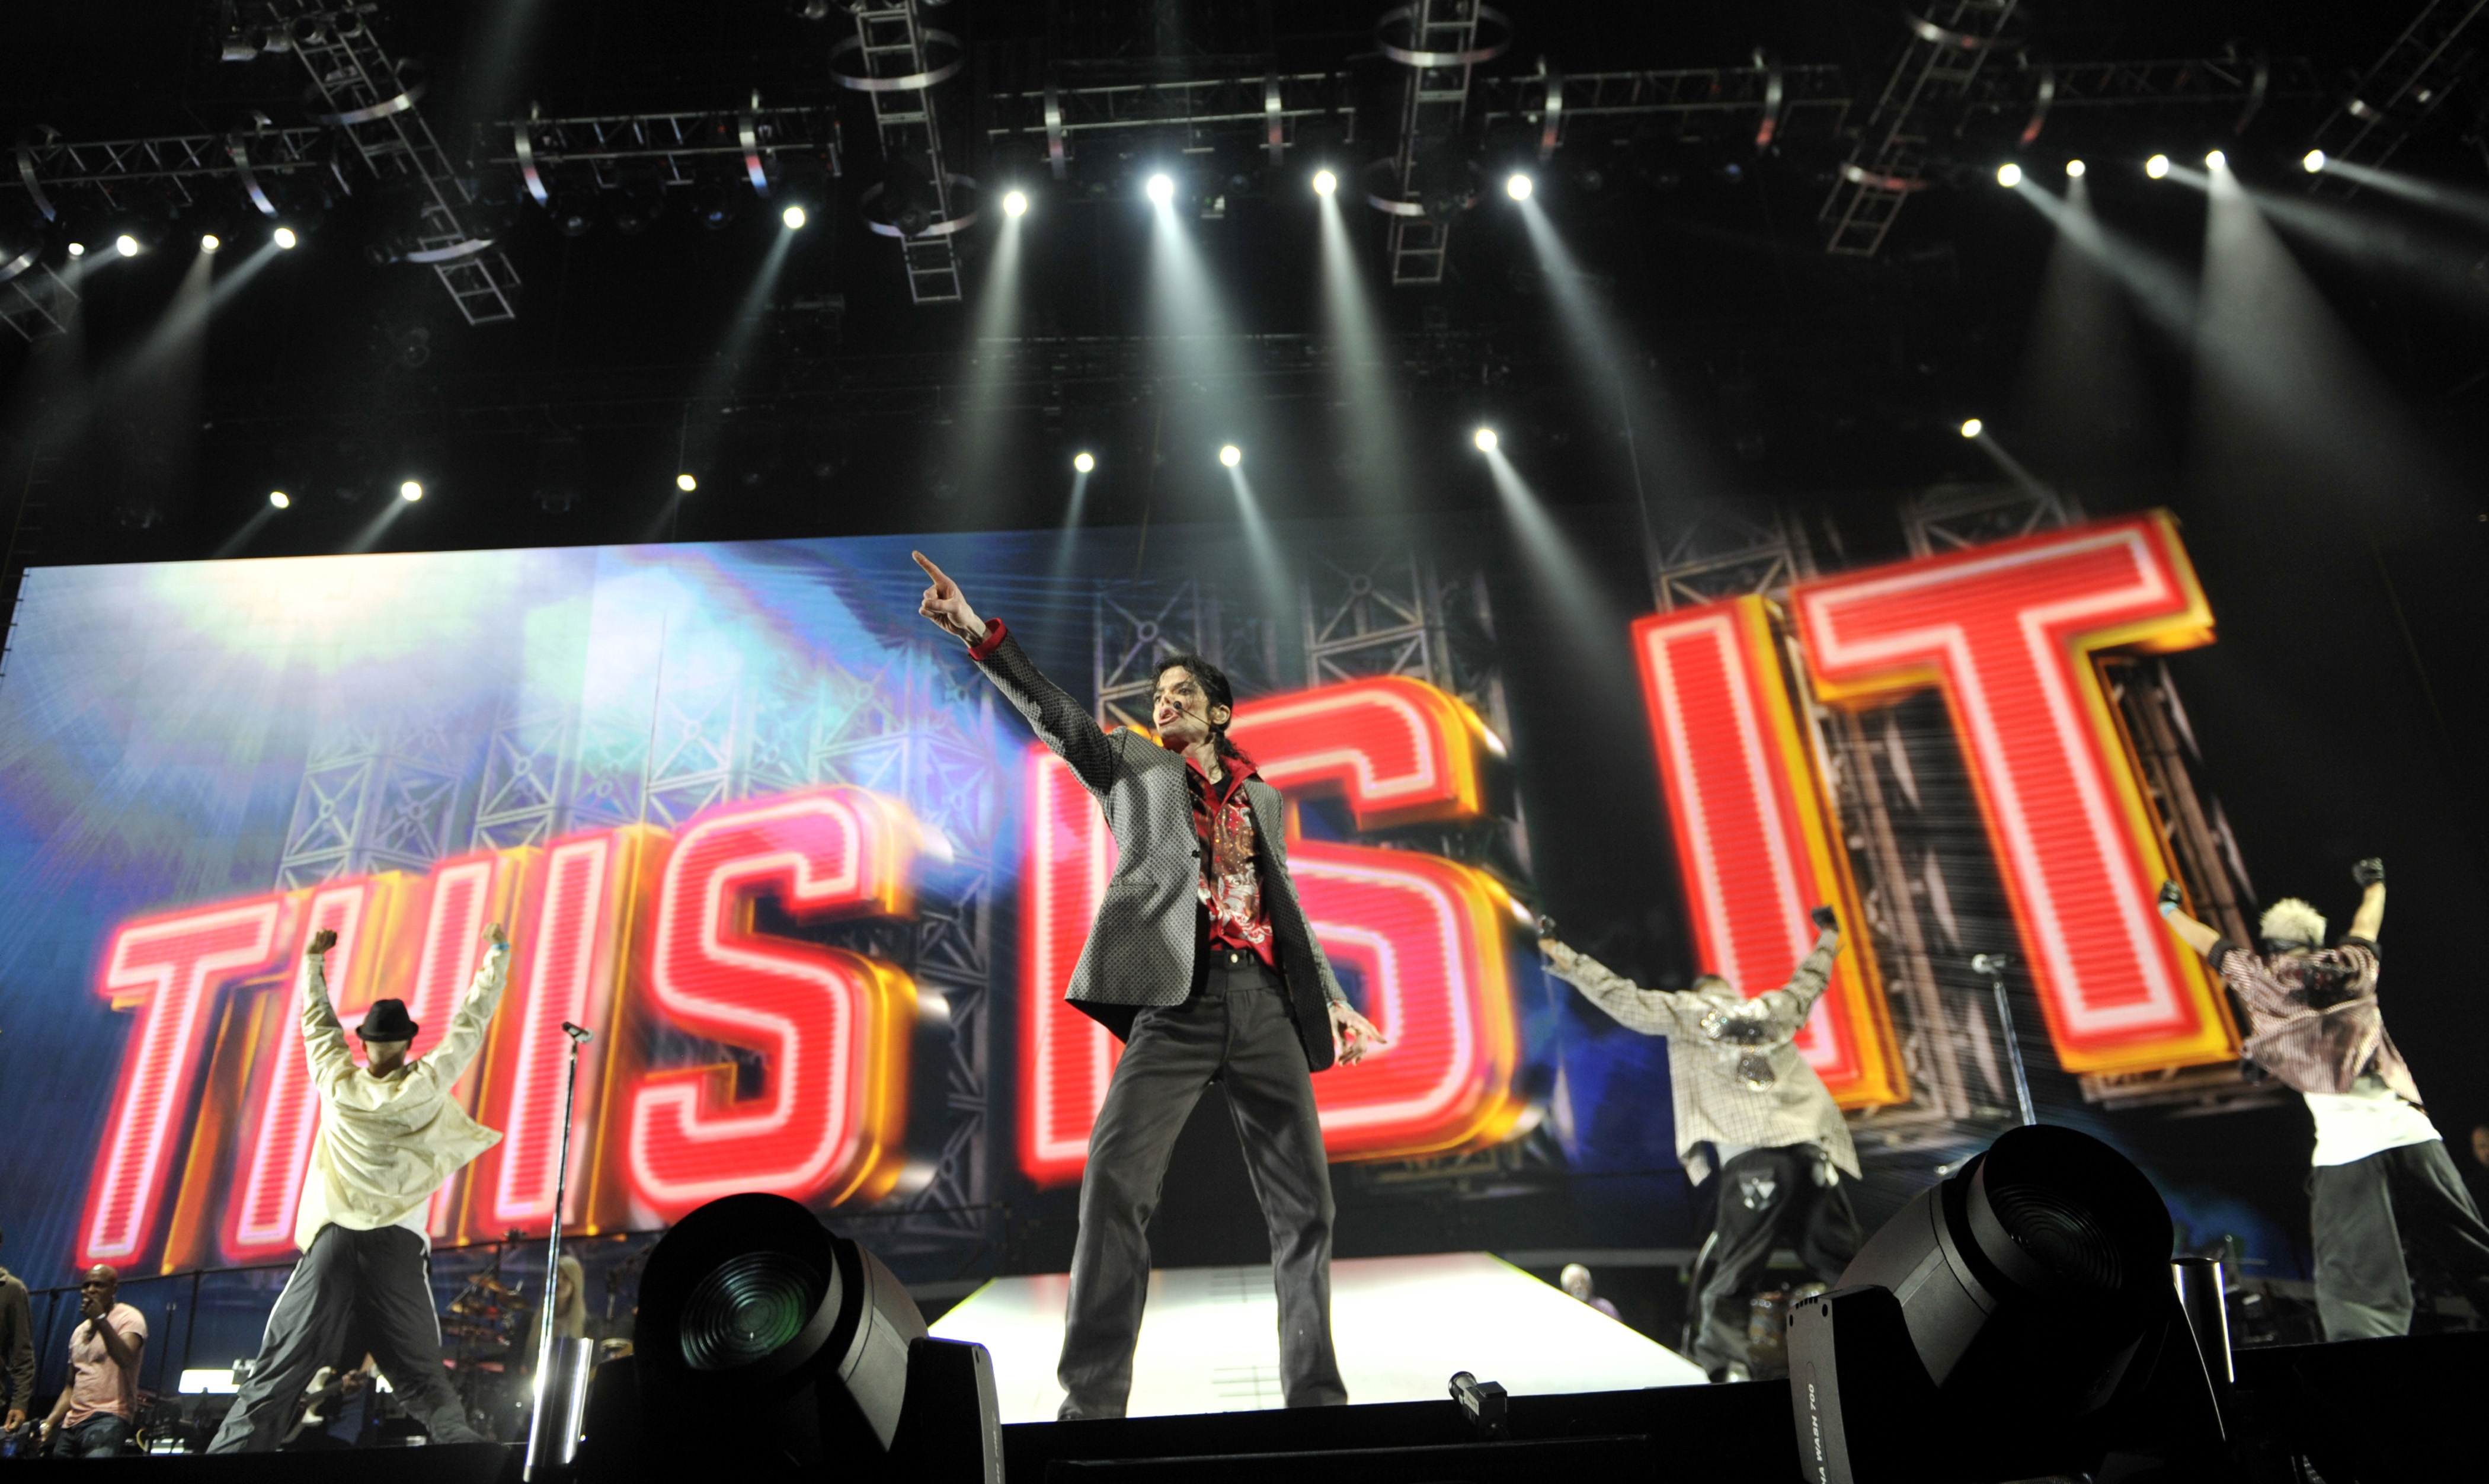 Michael Jackson’s last show rehearsal at STAPLES Center on June 23, 2009 in Los Angeles, California.